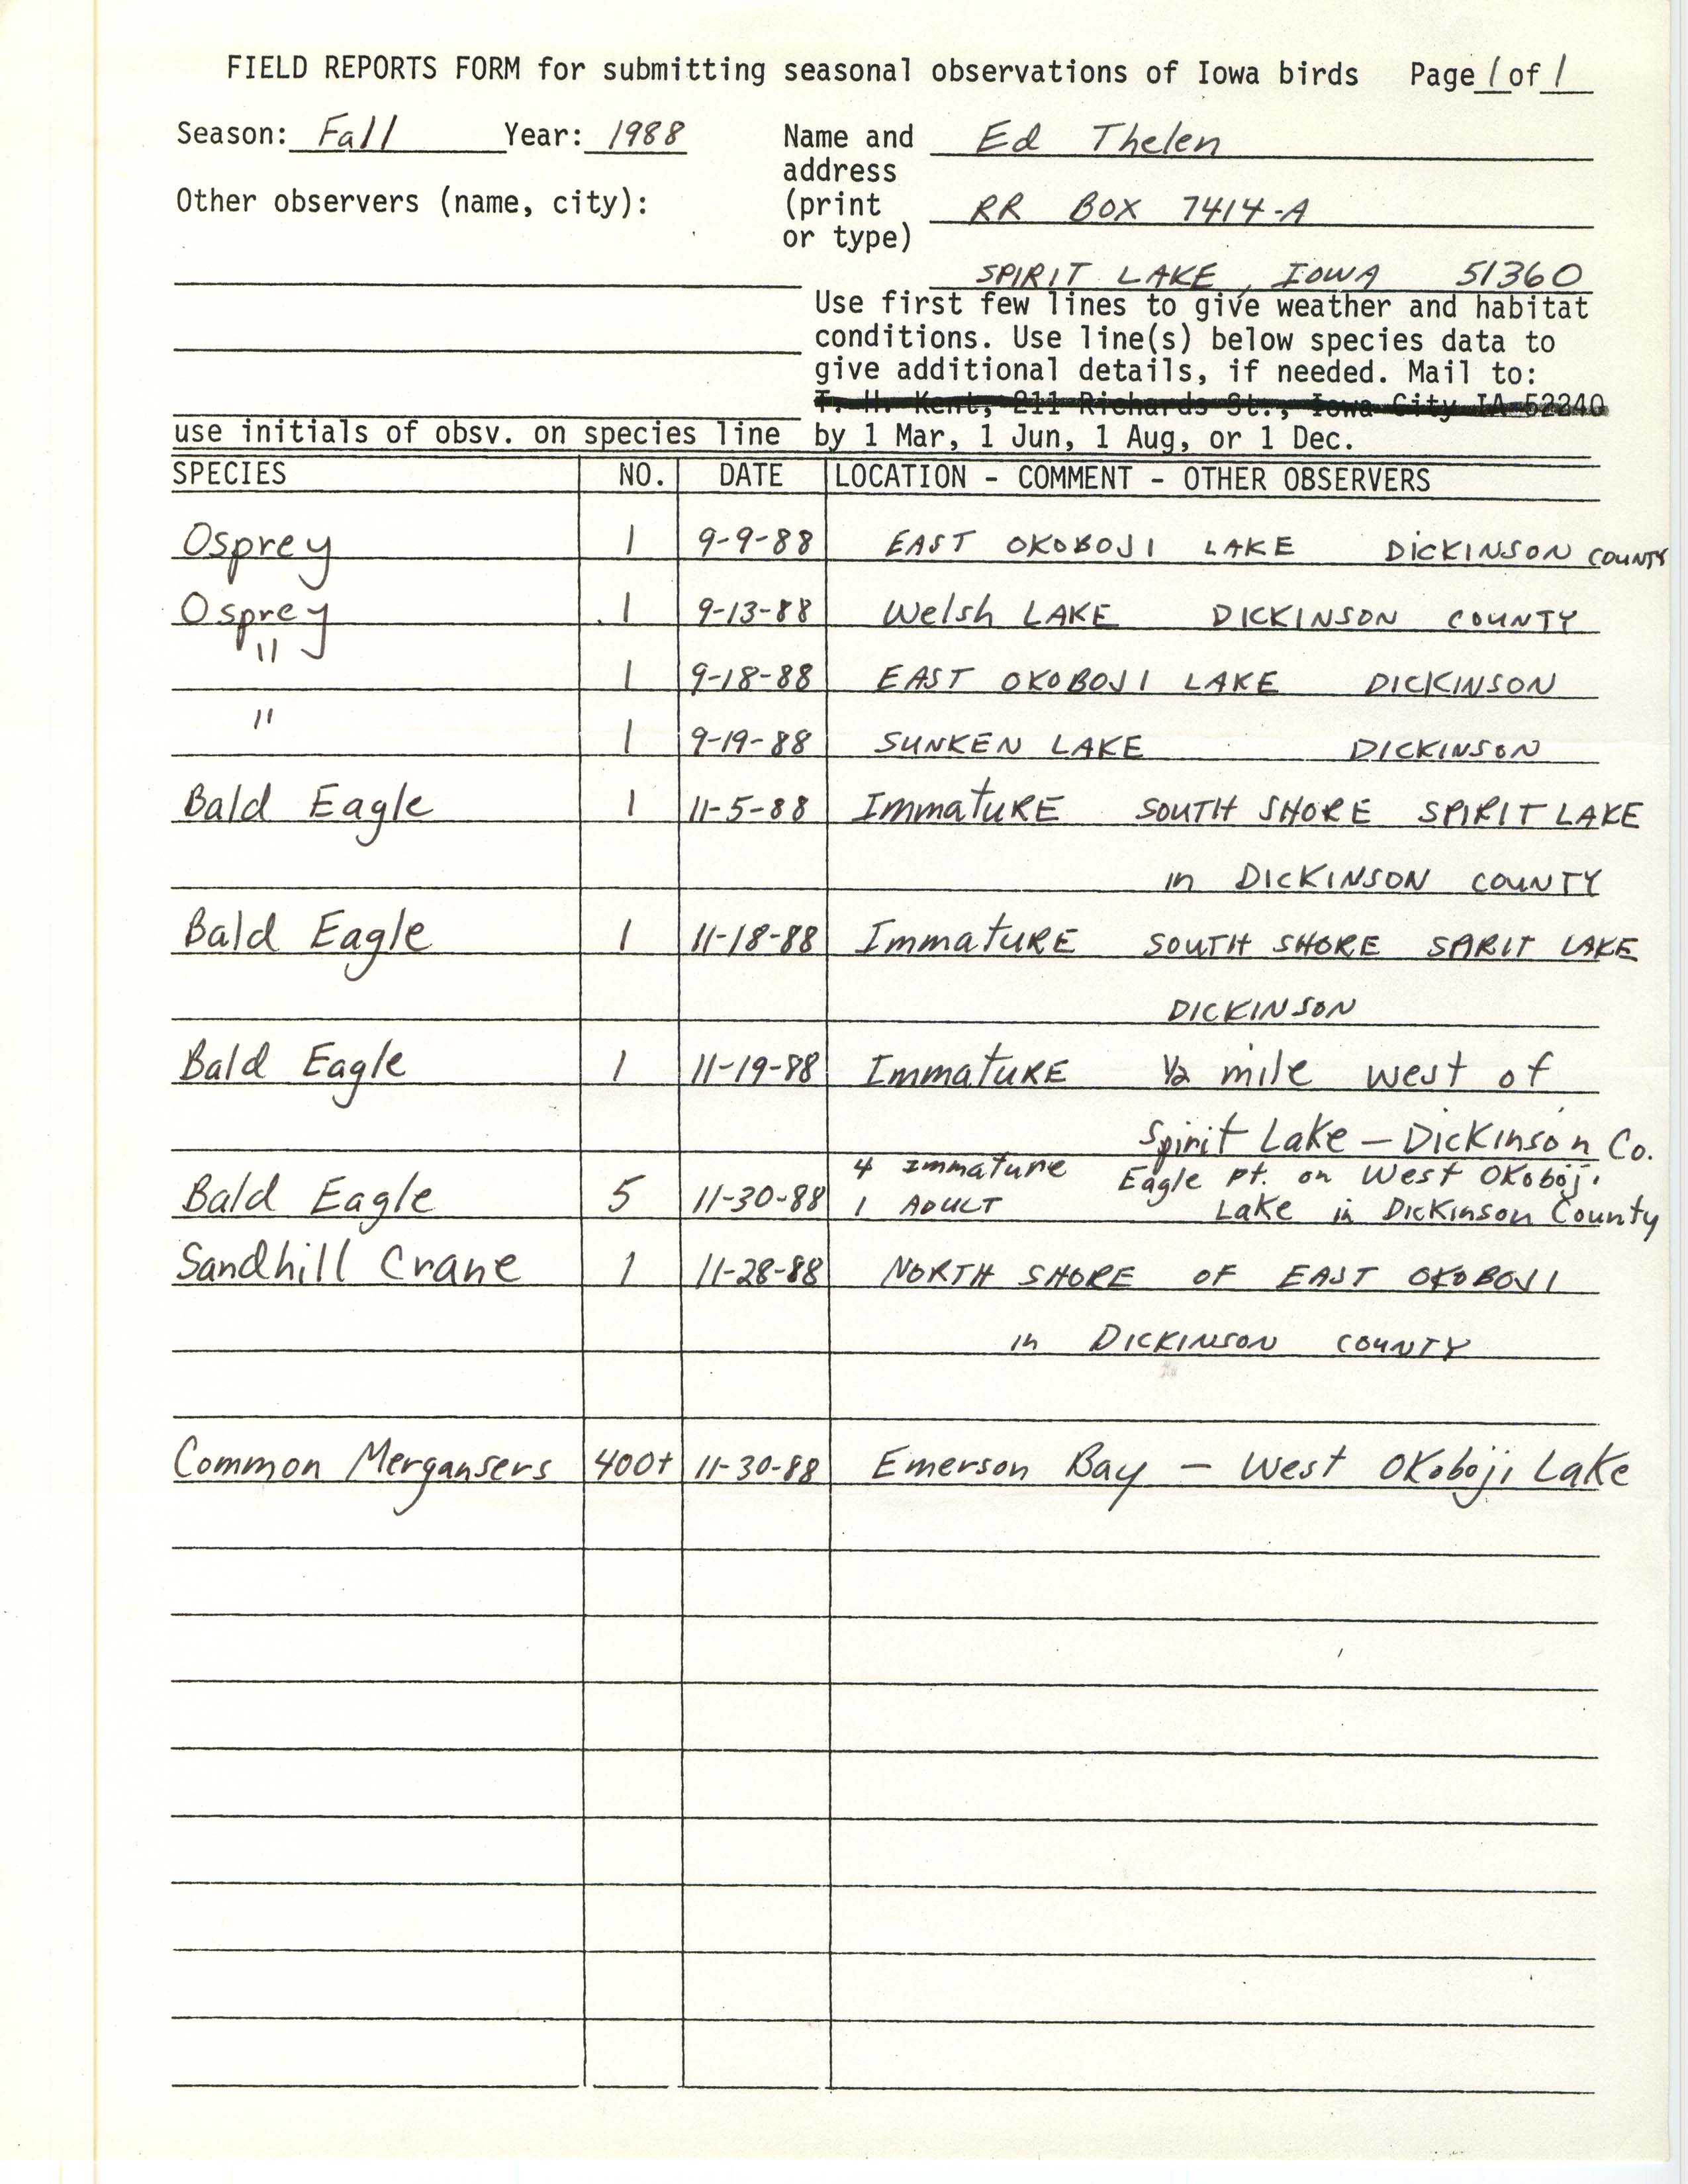 Field reports form for submitting seasonal observations of Iowa birds, Ed Thelen, fall 1988